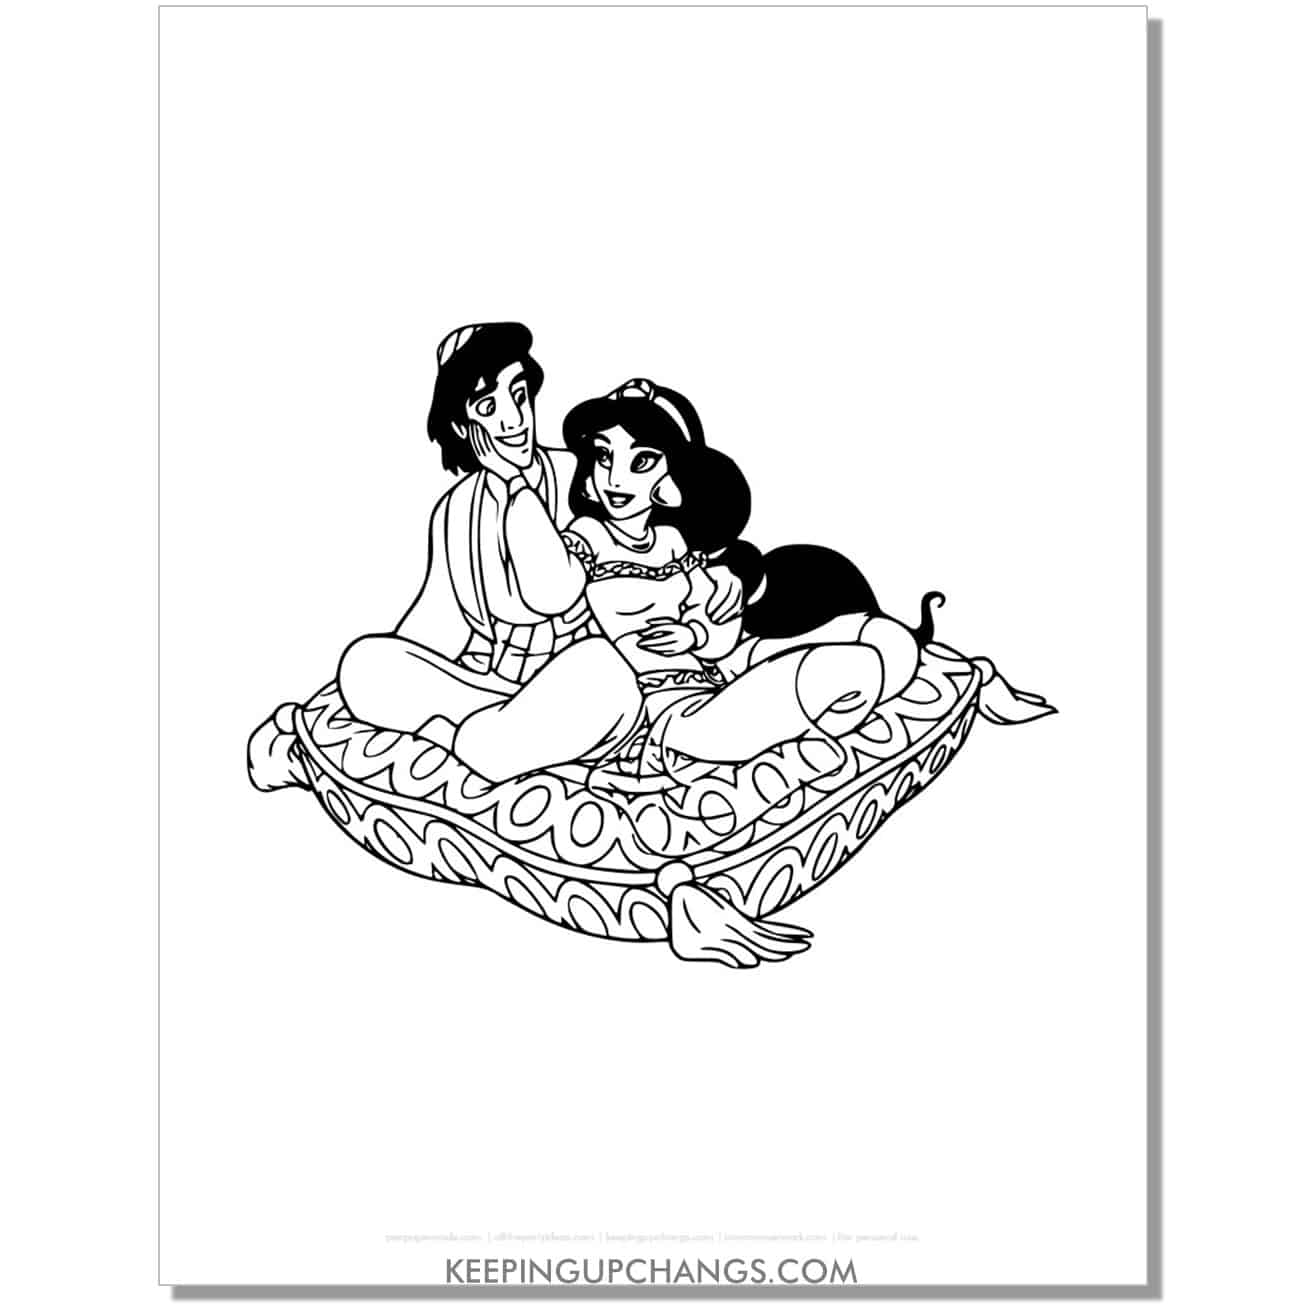 jasmine, aladdin on fluffy pillow coloring page, sheet.